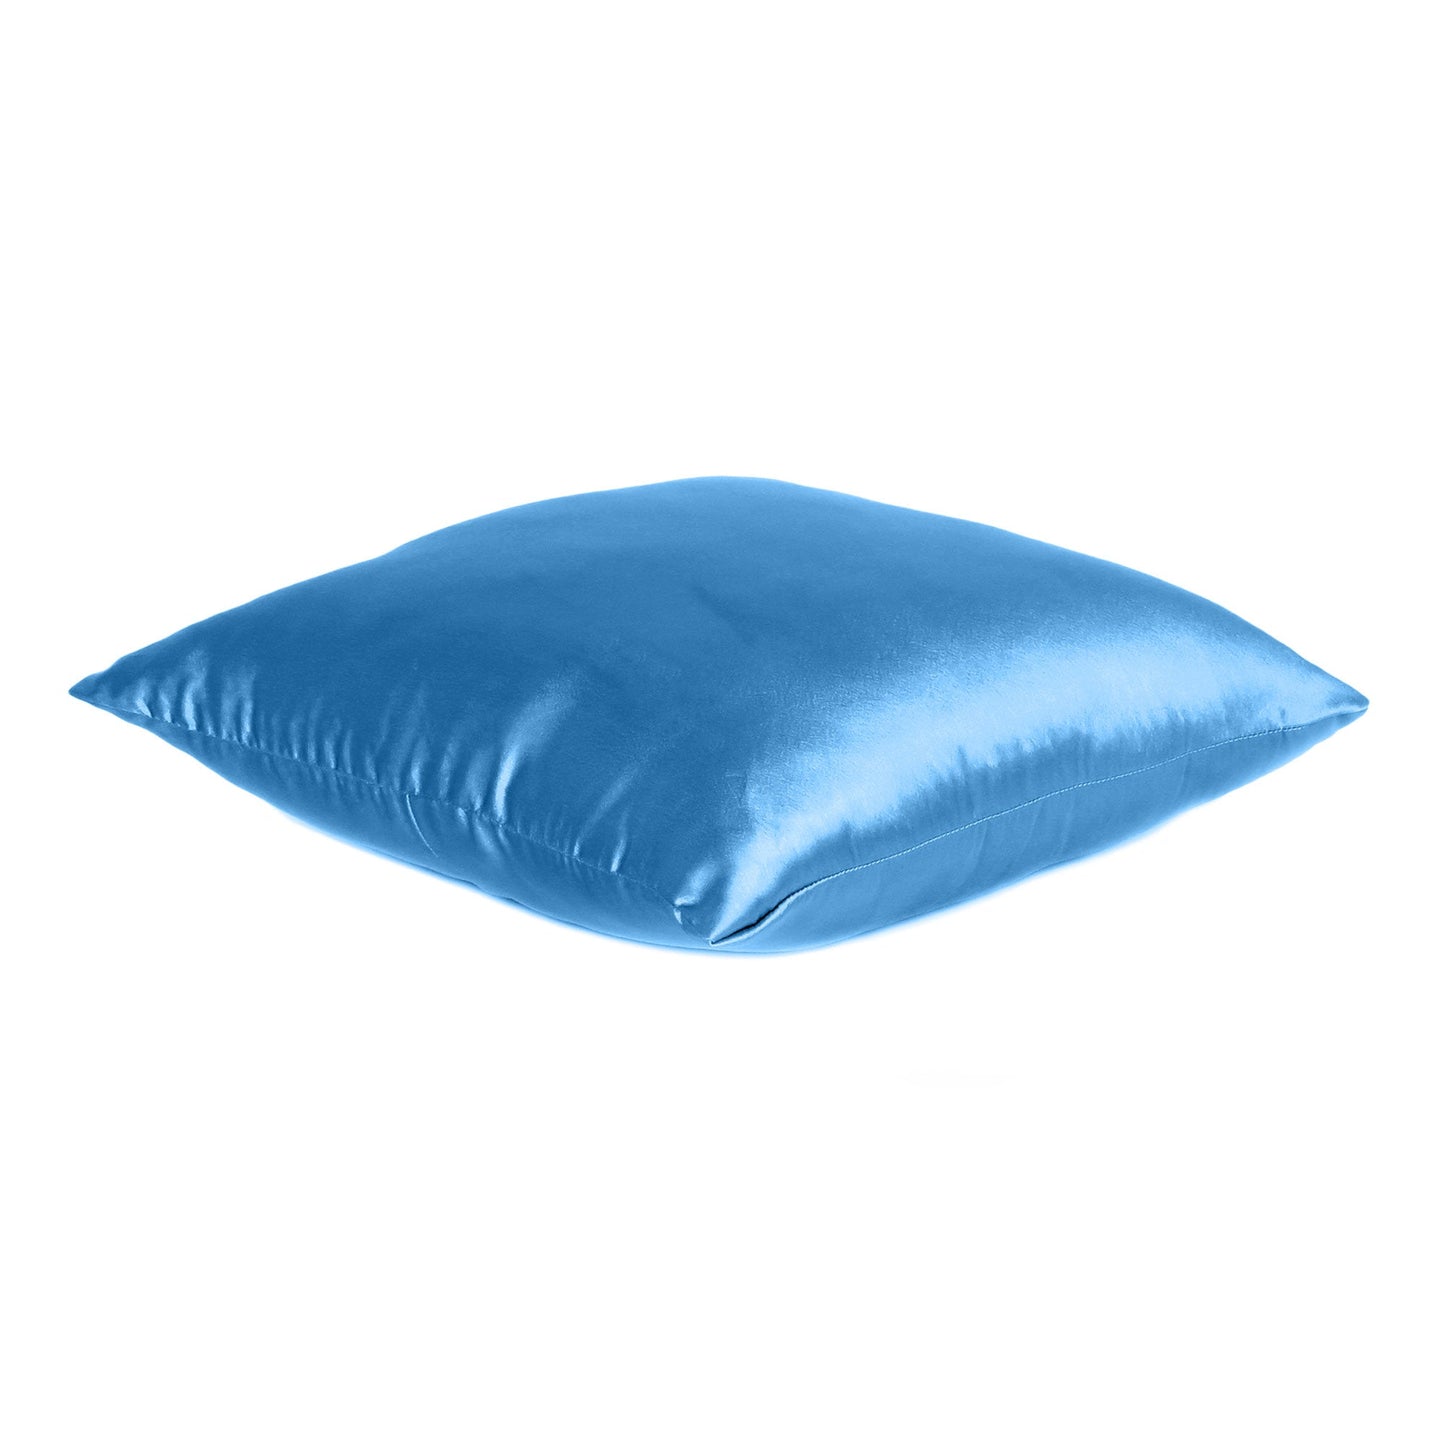 Blue Aster Satin Silky Cushion Covers in Set of 2